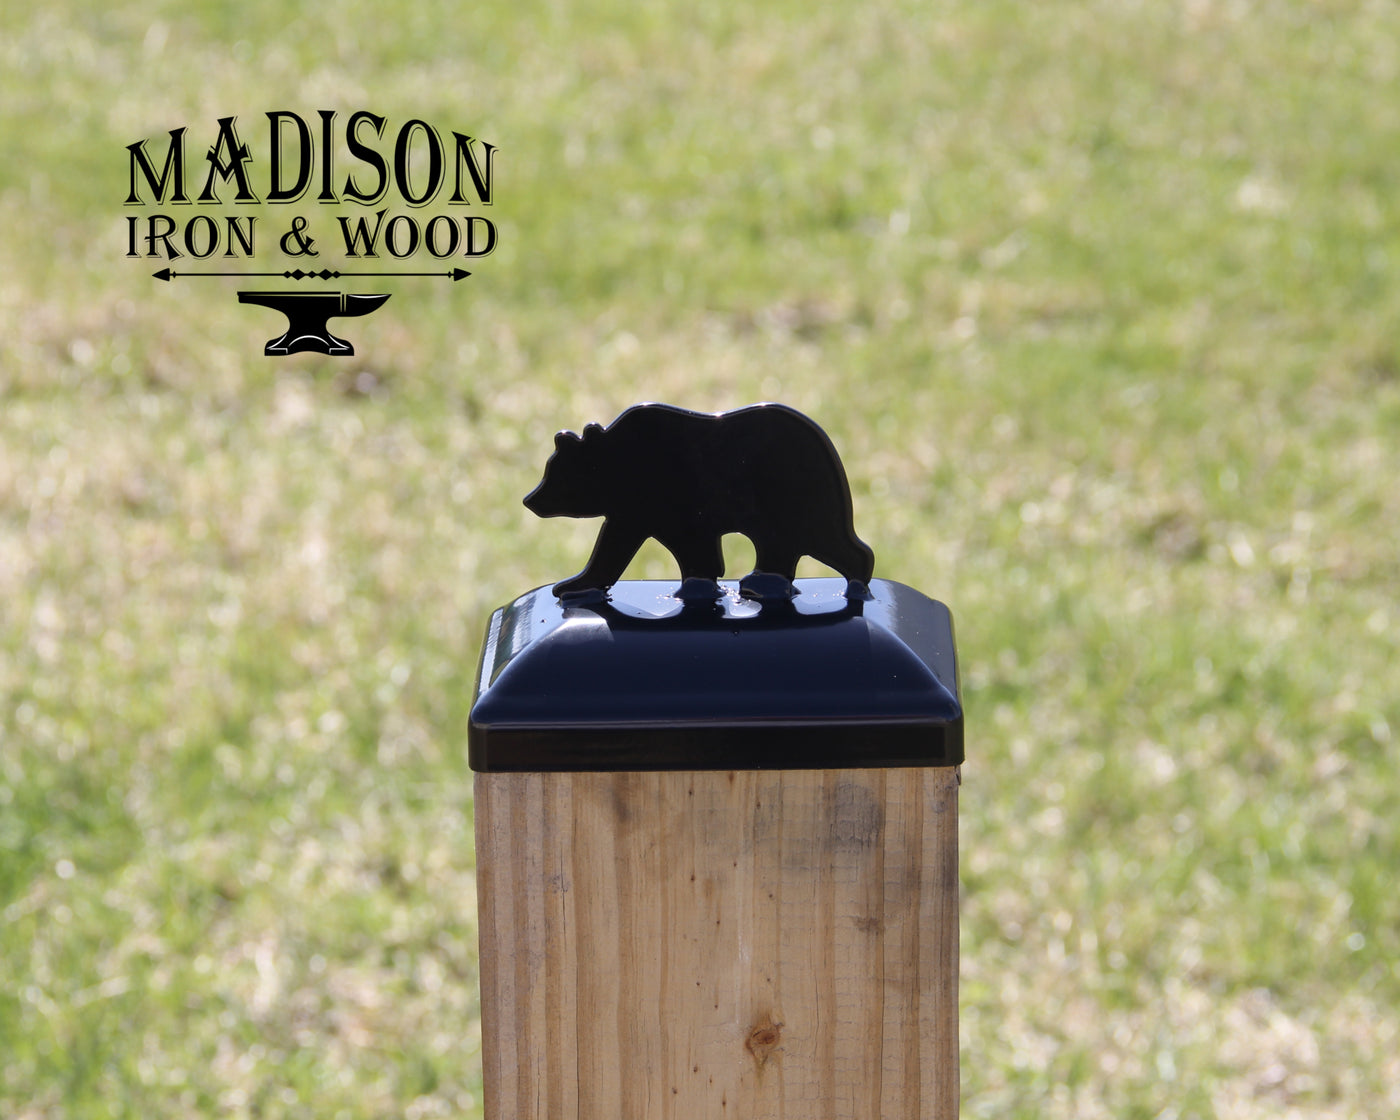 4x6 Bear Post Cap - Madison Iron and Wood - Post Cap - metal outdoor decor - Steel deocrations - american made products - veteran owned business products - fencing decorations - fencing supplies - custom wall decorations - personalized wall signs - steel - decorative post caps - steel post caps - metal post caps - brackets - structural brackets - home improvement - easter - easter decorations - easter gift - easter yard decor